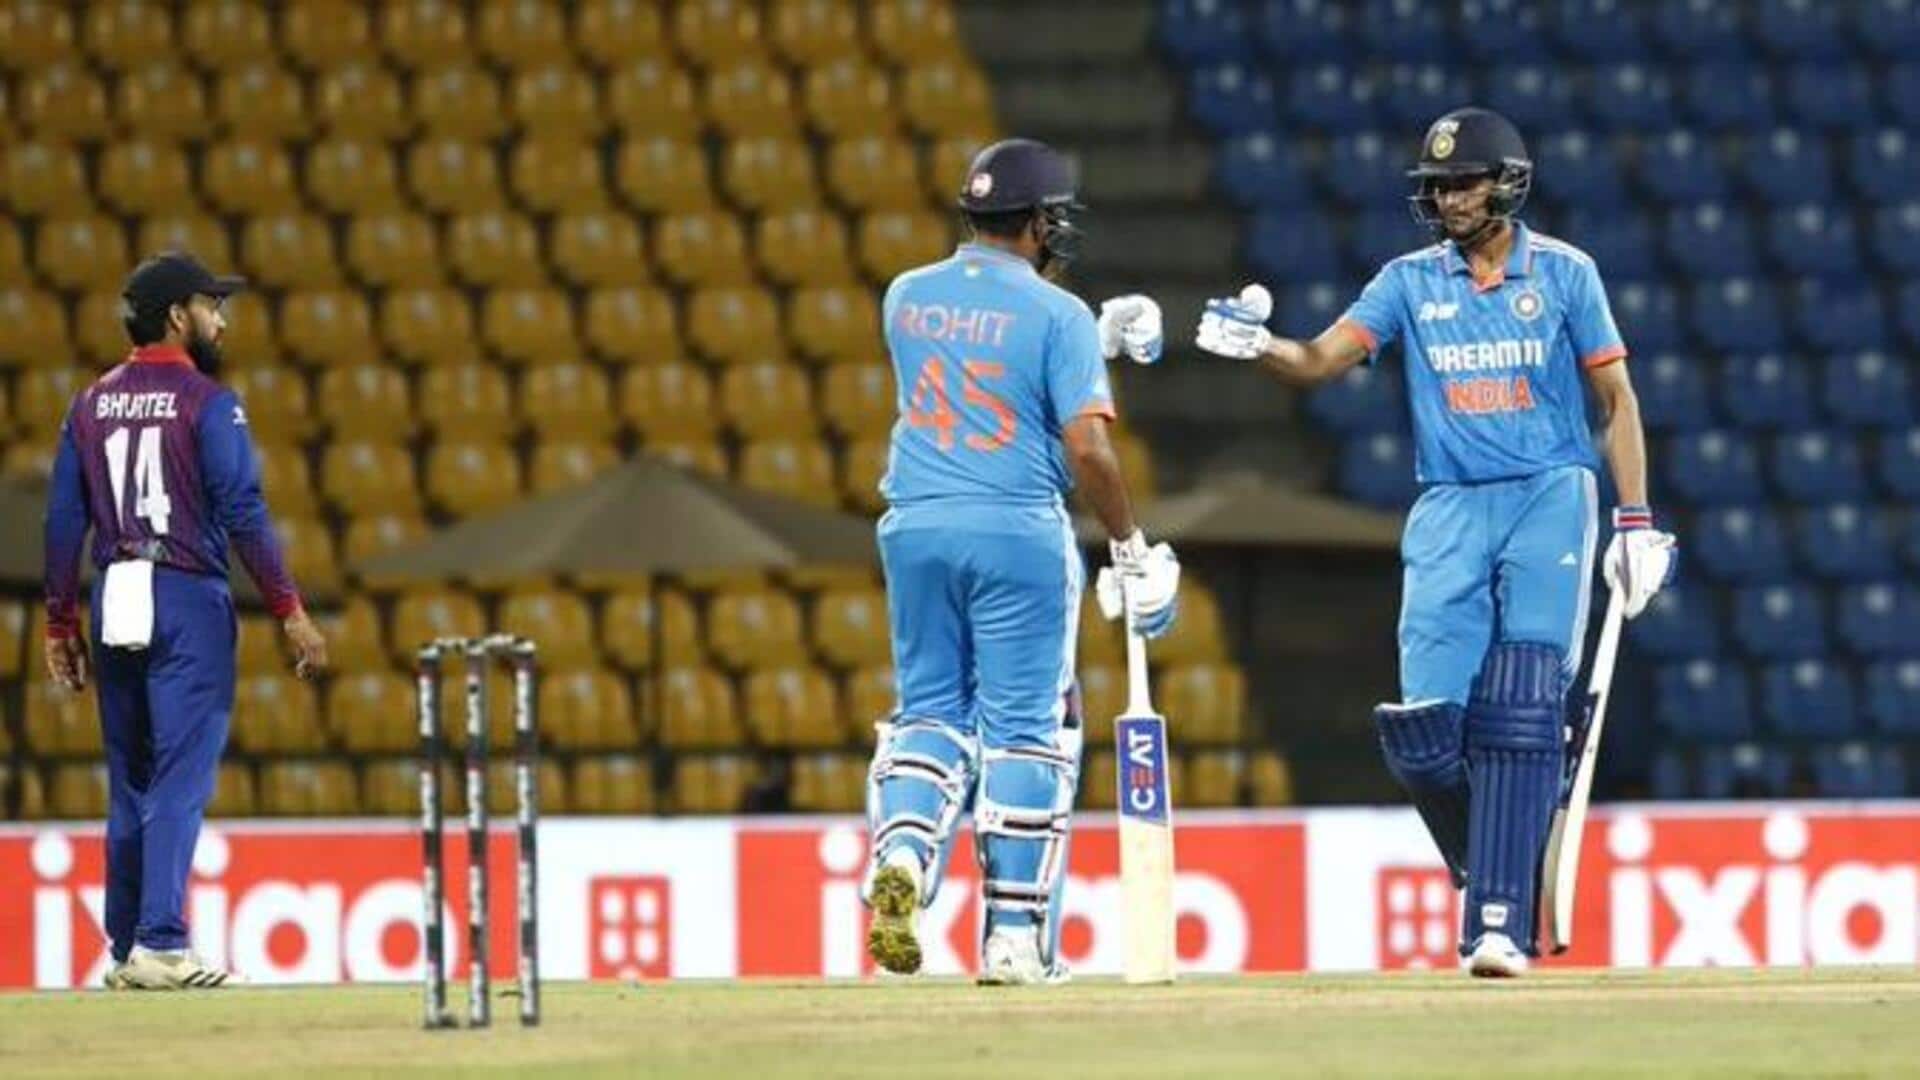 India claim their first 10-wicket Asia Cup win since 1984 